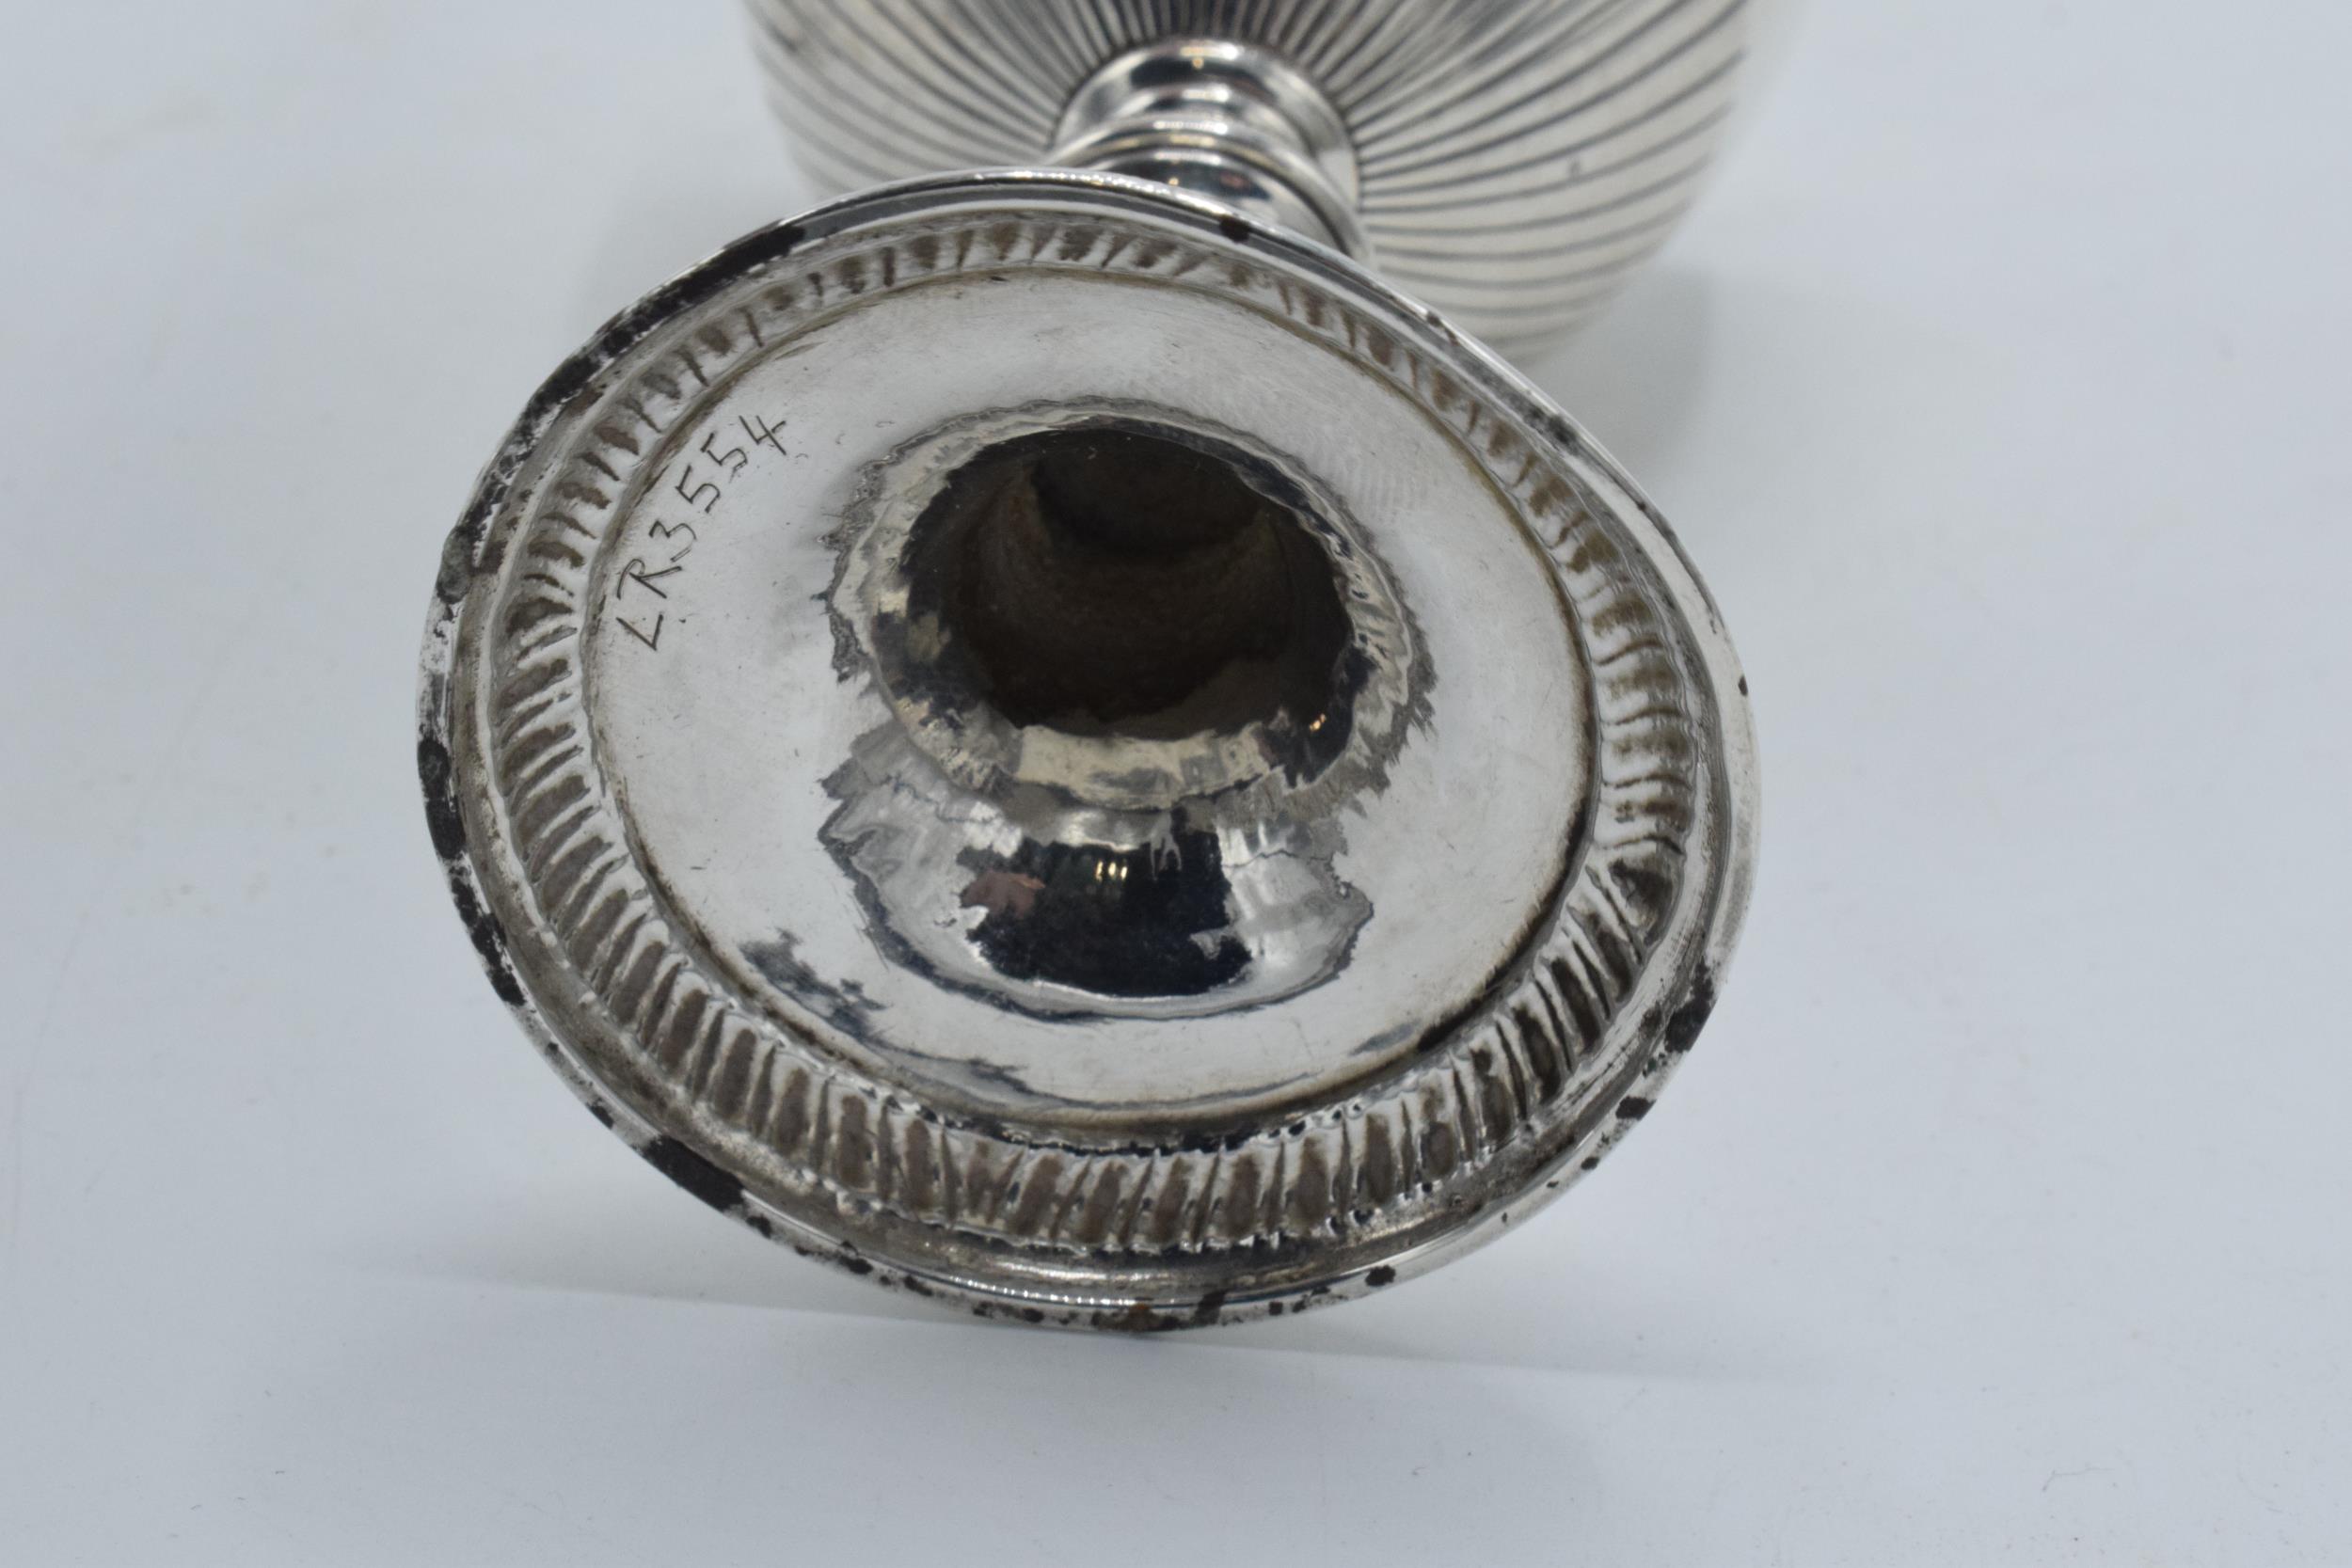 Victorian silver chalice with monogram engraved, 101.2 grams, 11.5cm tall, unhallmarked. - Image 3 of 4